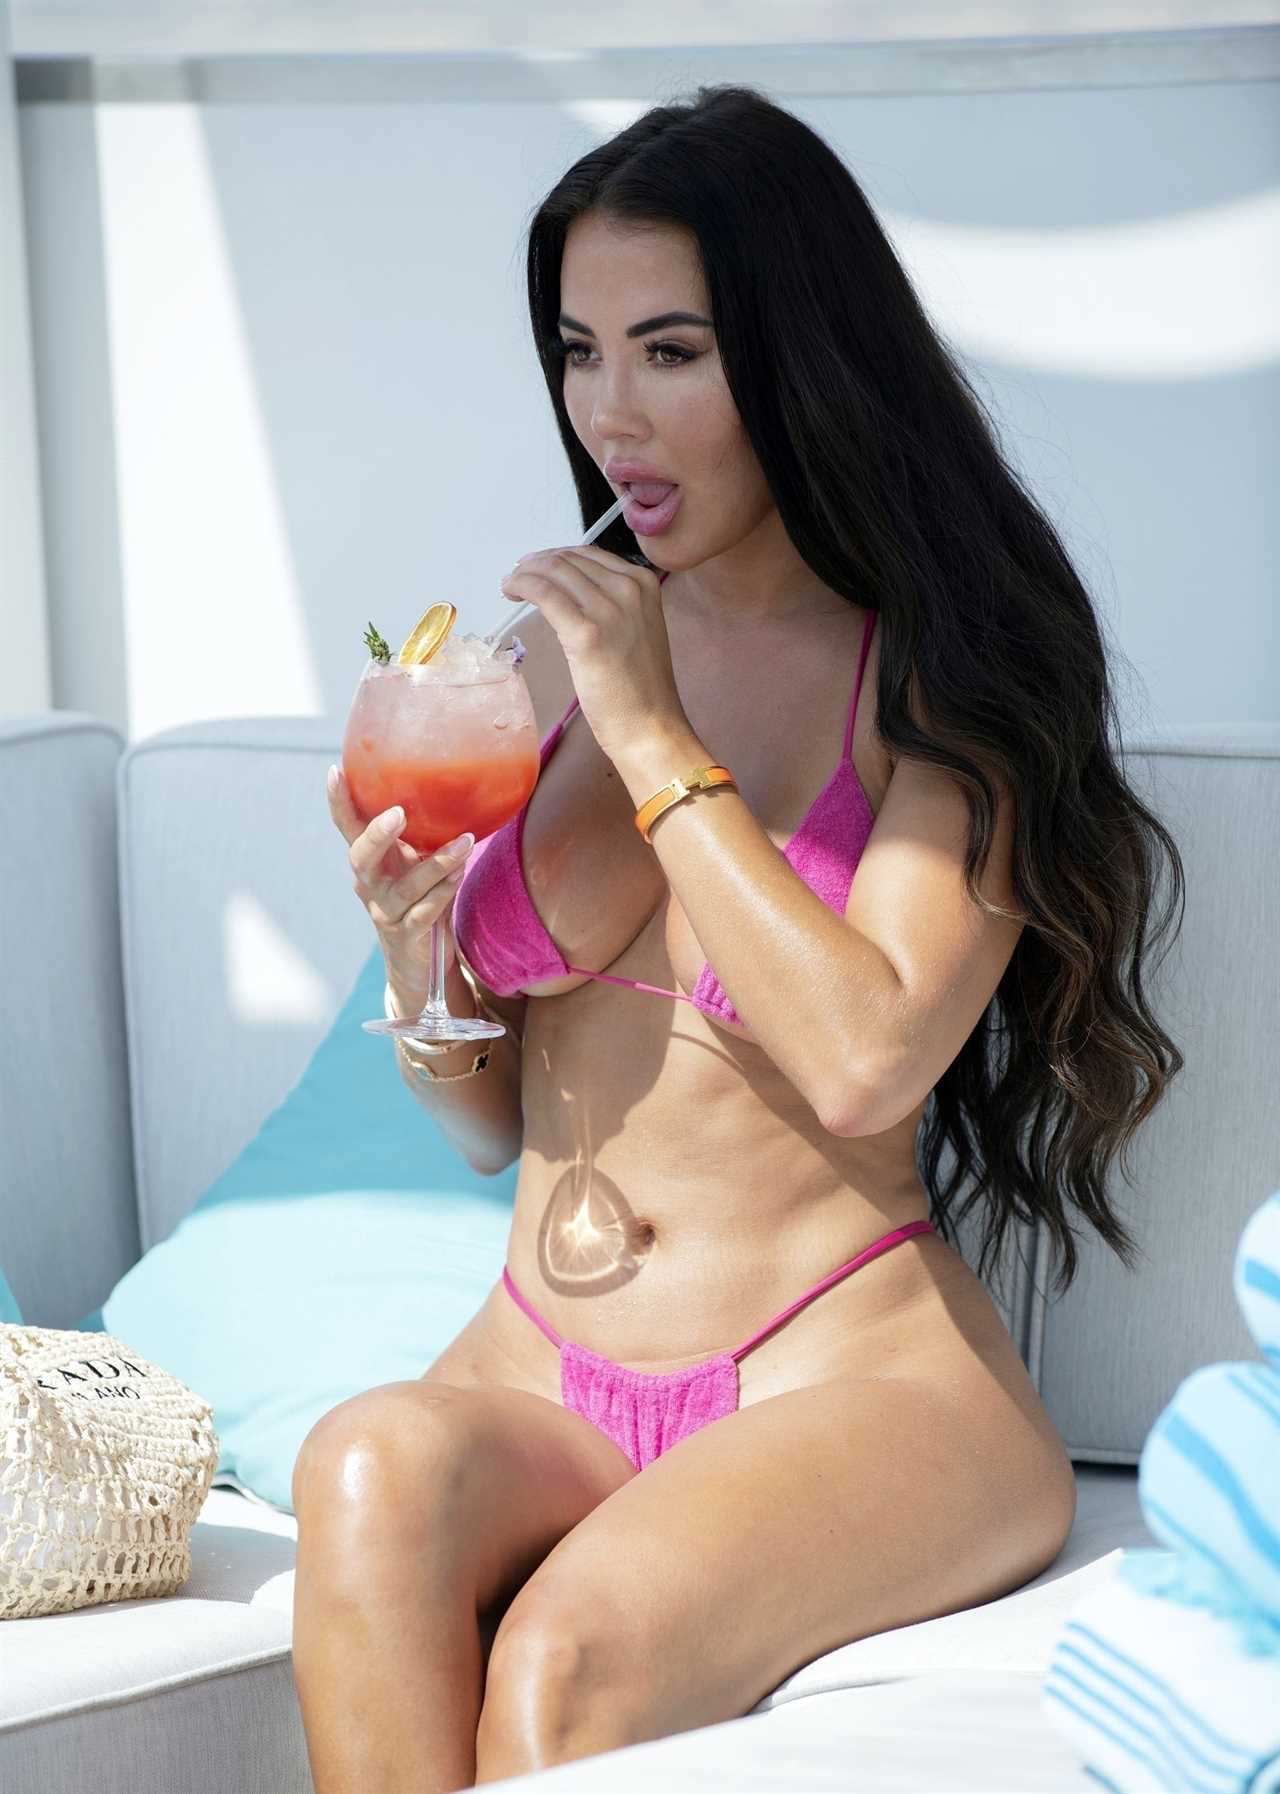 Towie’s Yazmin Oukhellou shows off her incredible body in sexy bikini snaps